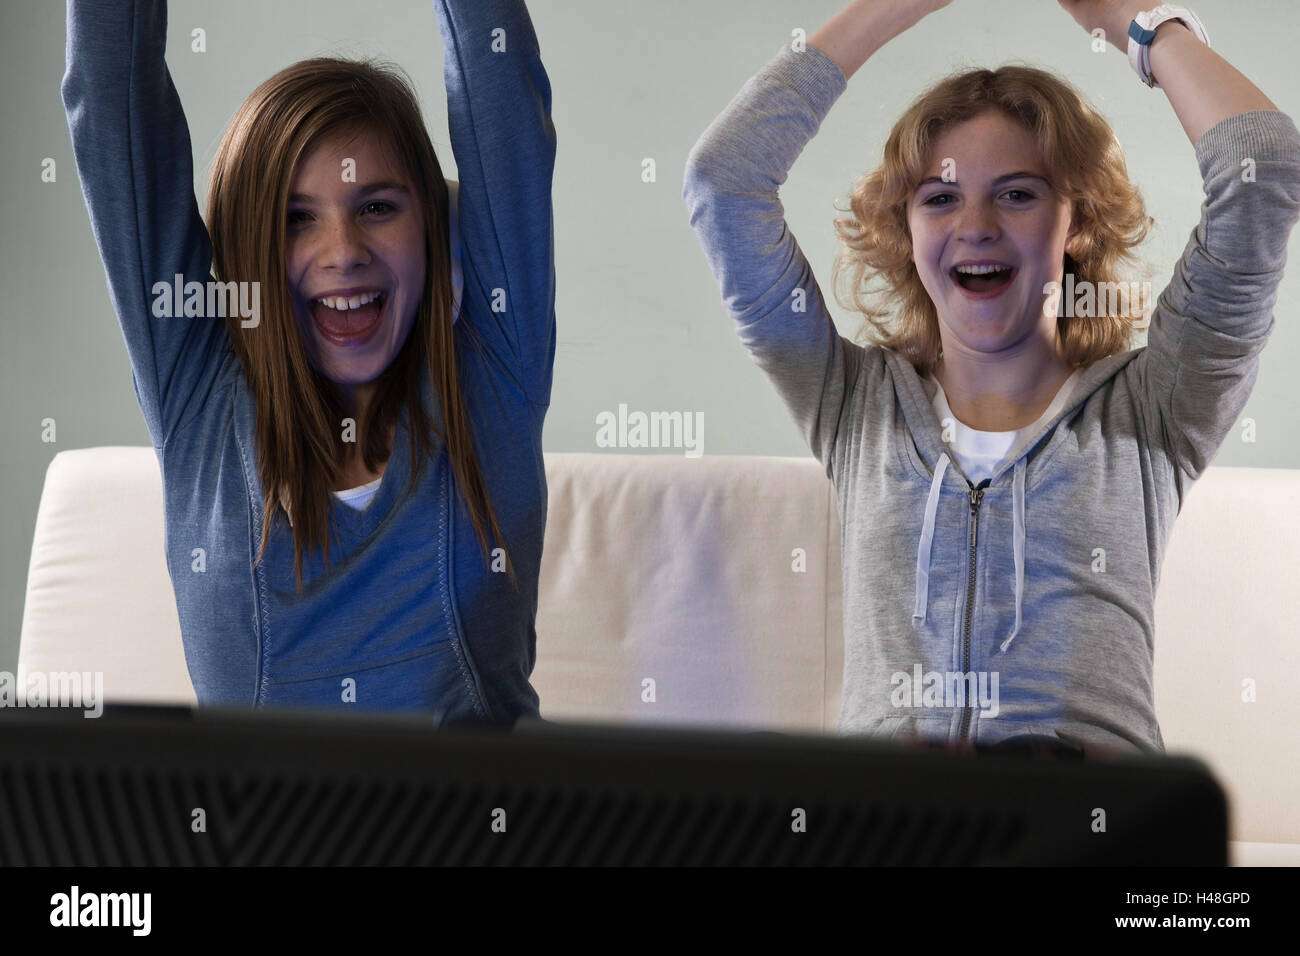 Two girls sit rejoicing before a TV, Stock Photo